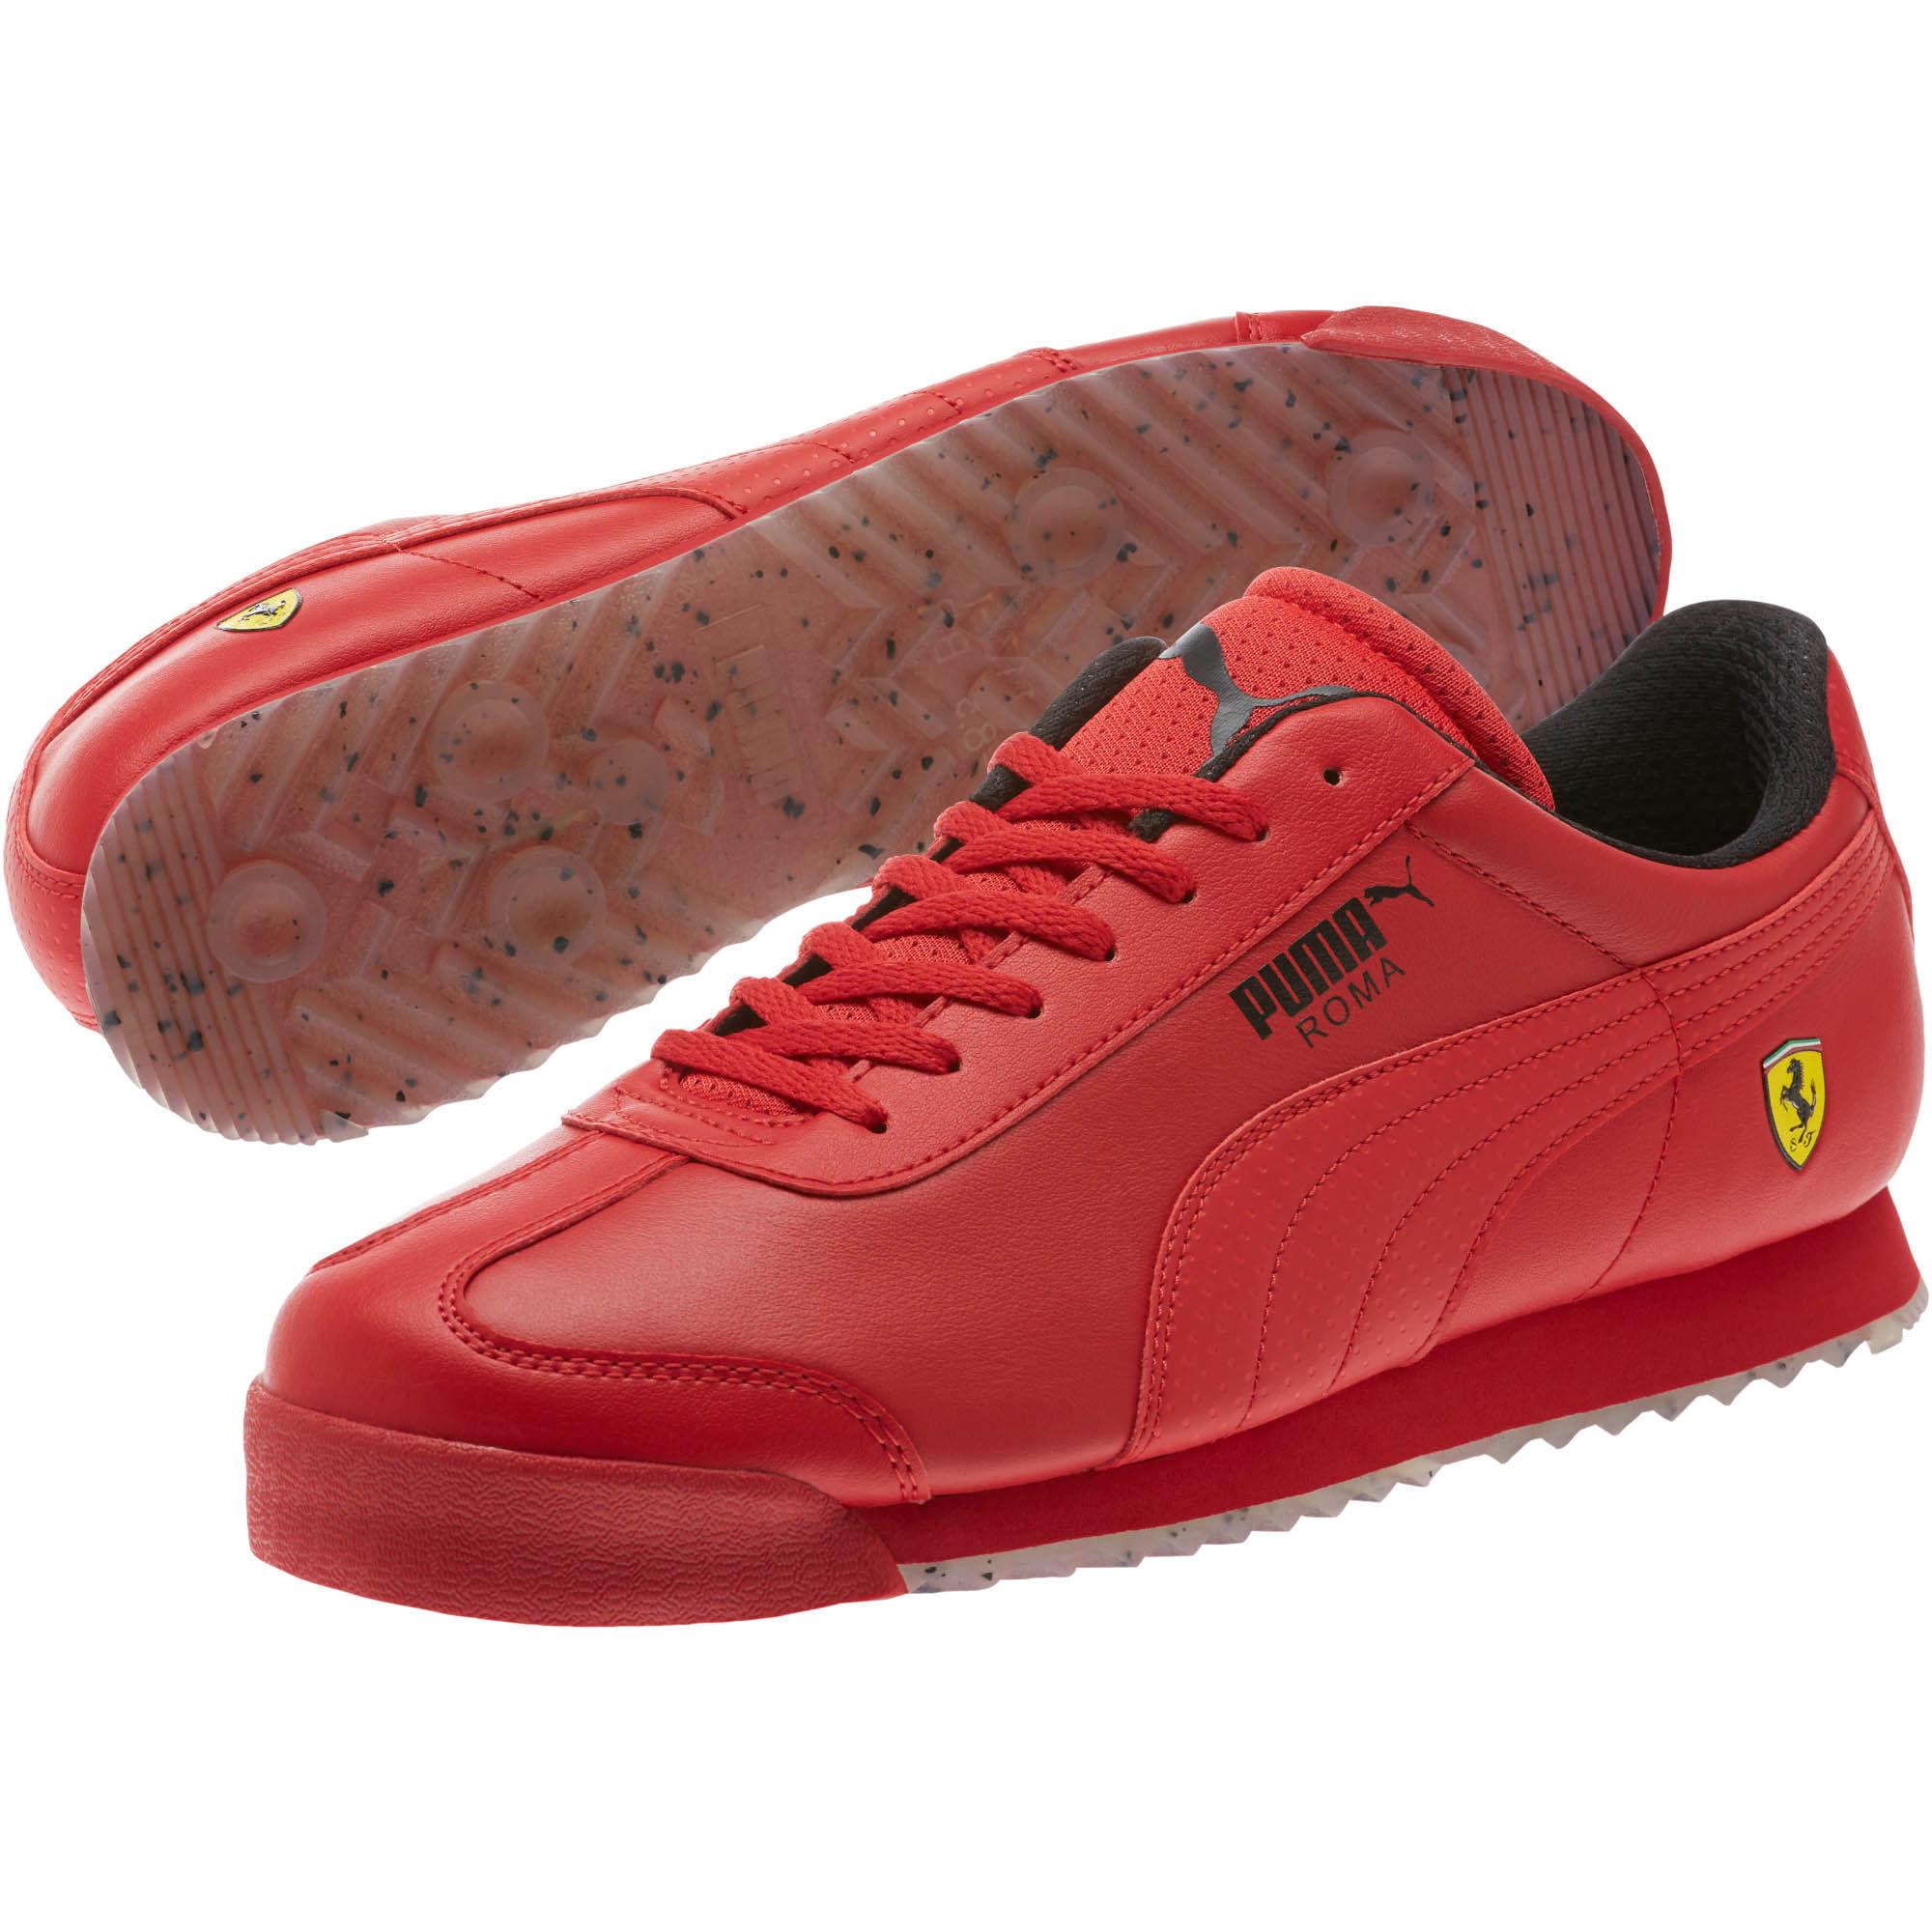 puma roma ferrari Online Shopping mall | Find the best prices and ...